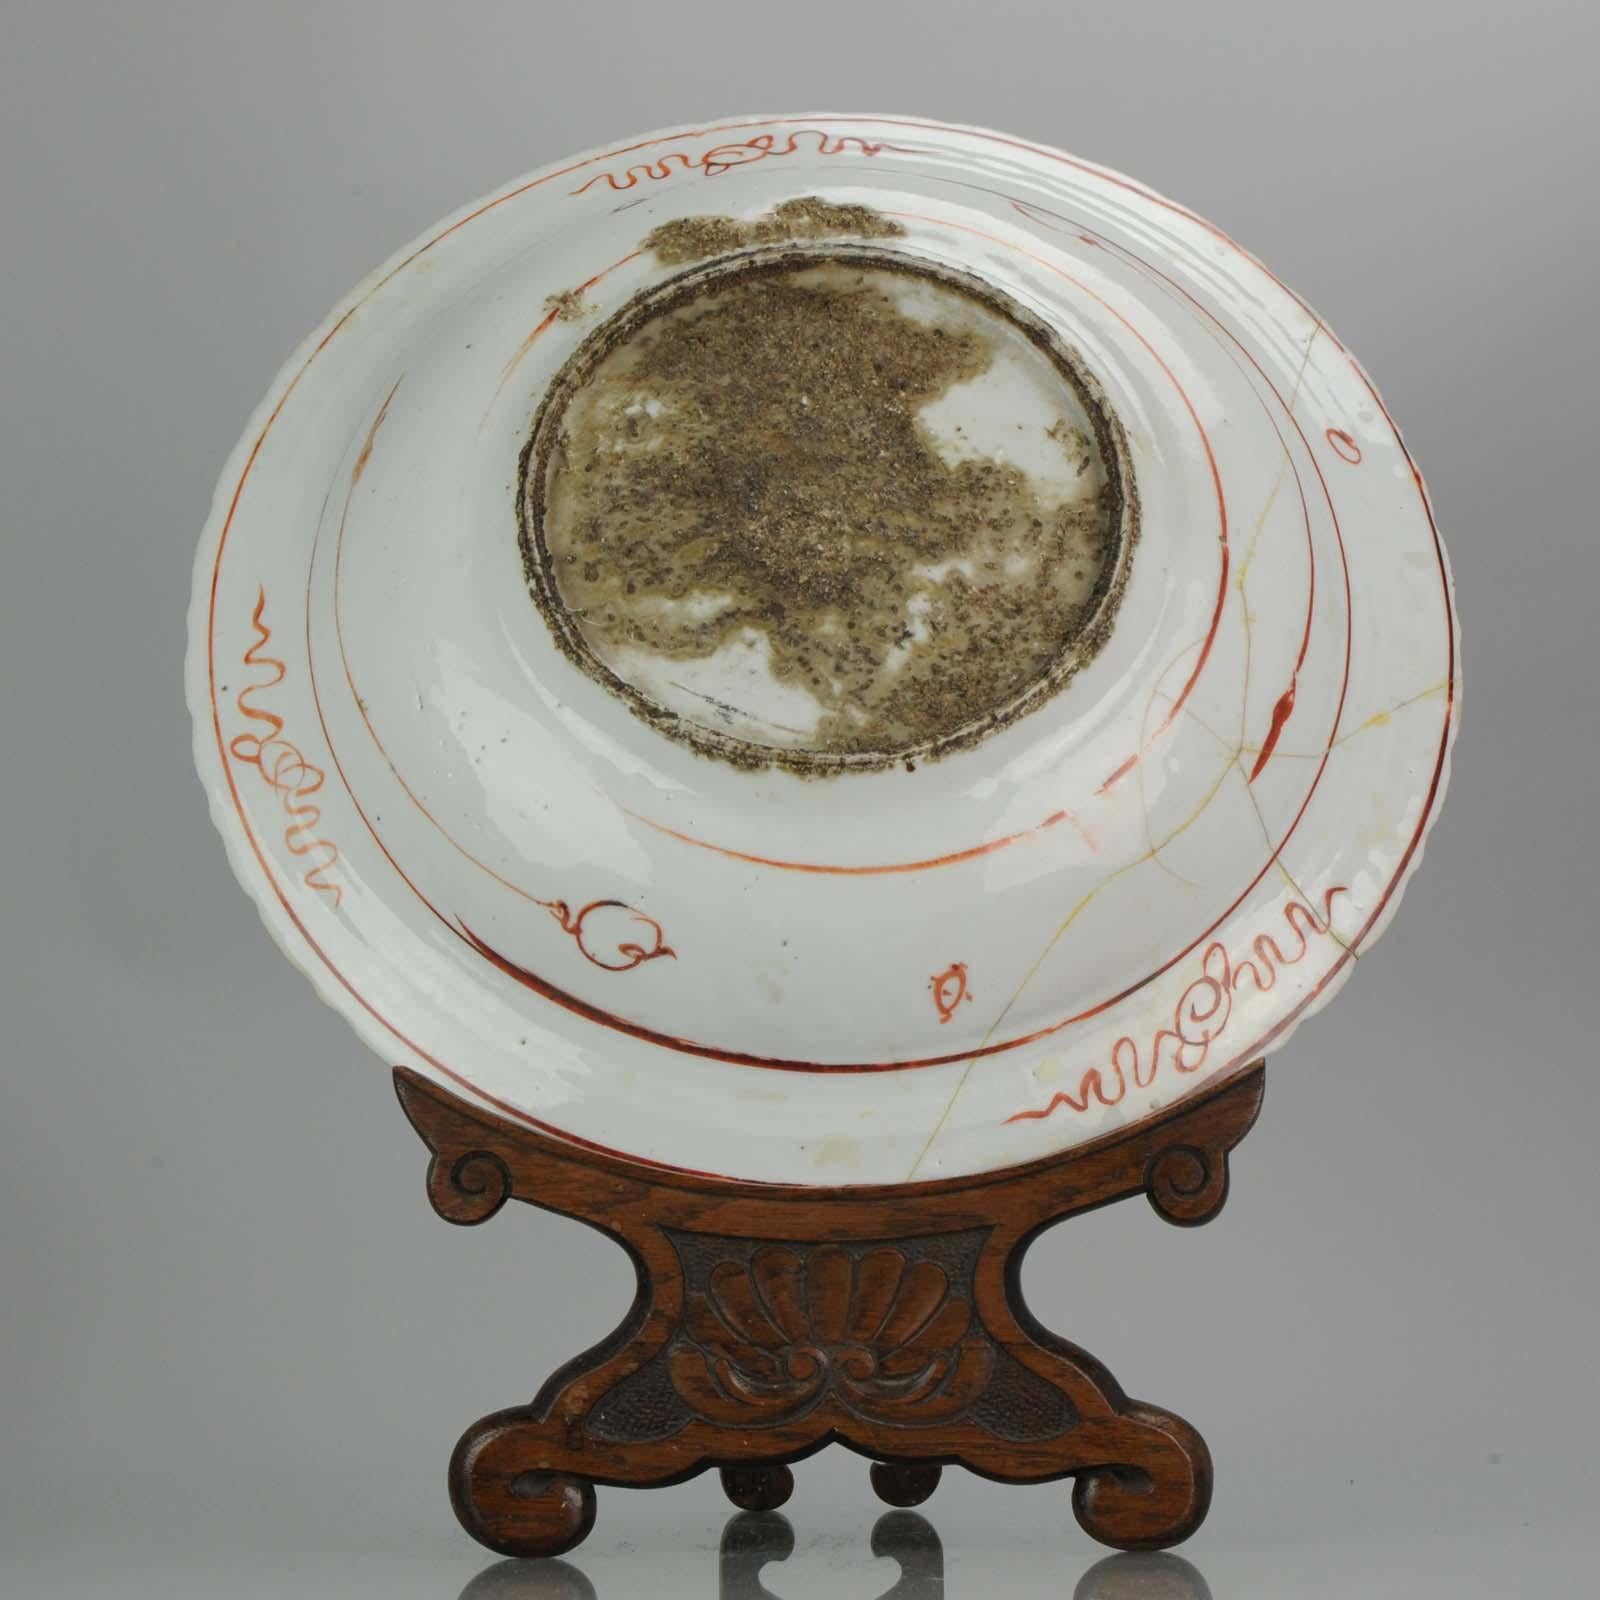 Majestic Zhangzhou Swatow Charger Ko Akae Verte China Ming Dynasty In Good Condition For Sale In Amsterdam, Noord Holland